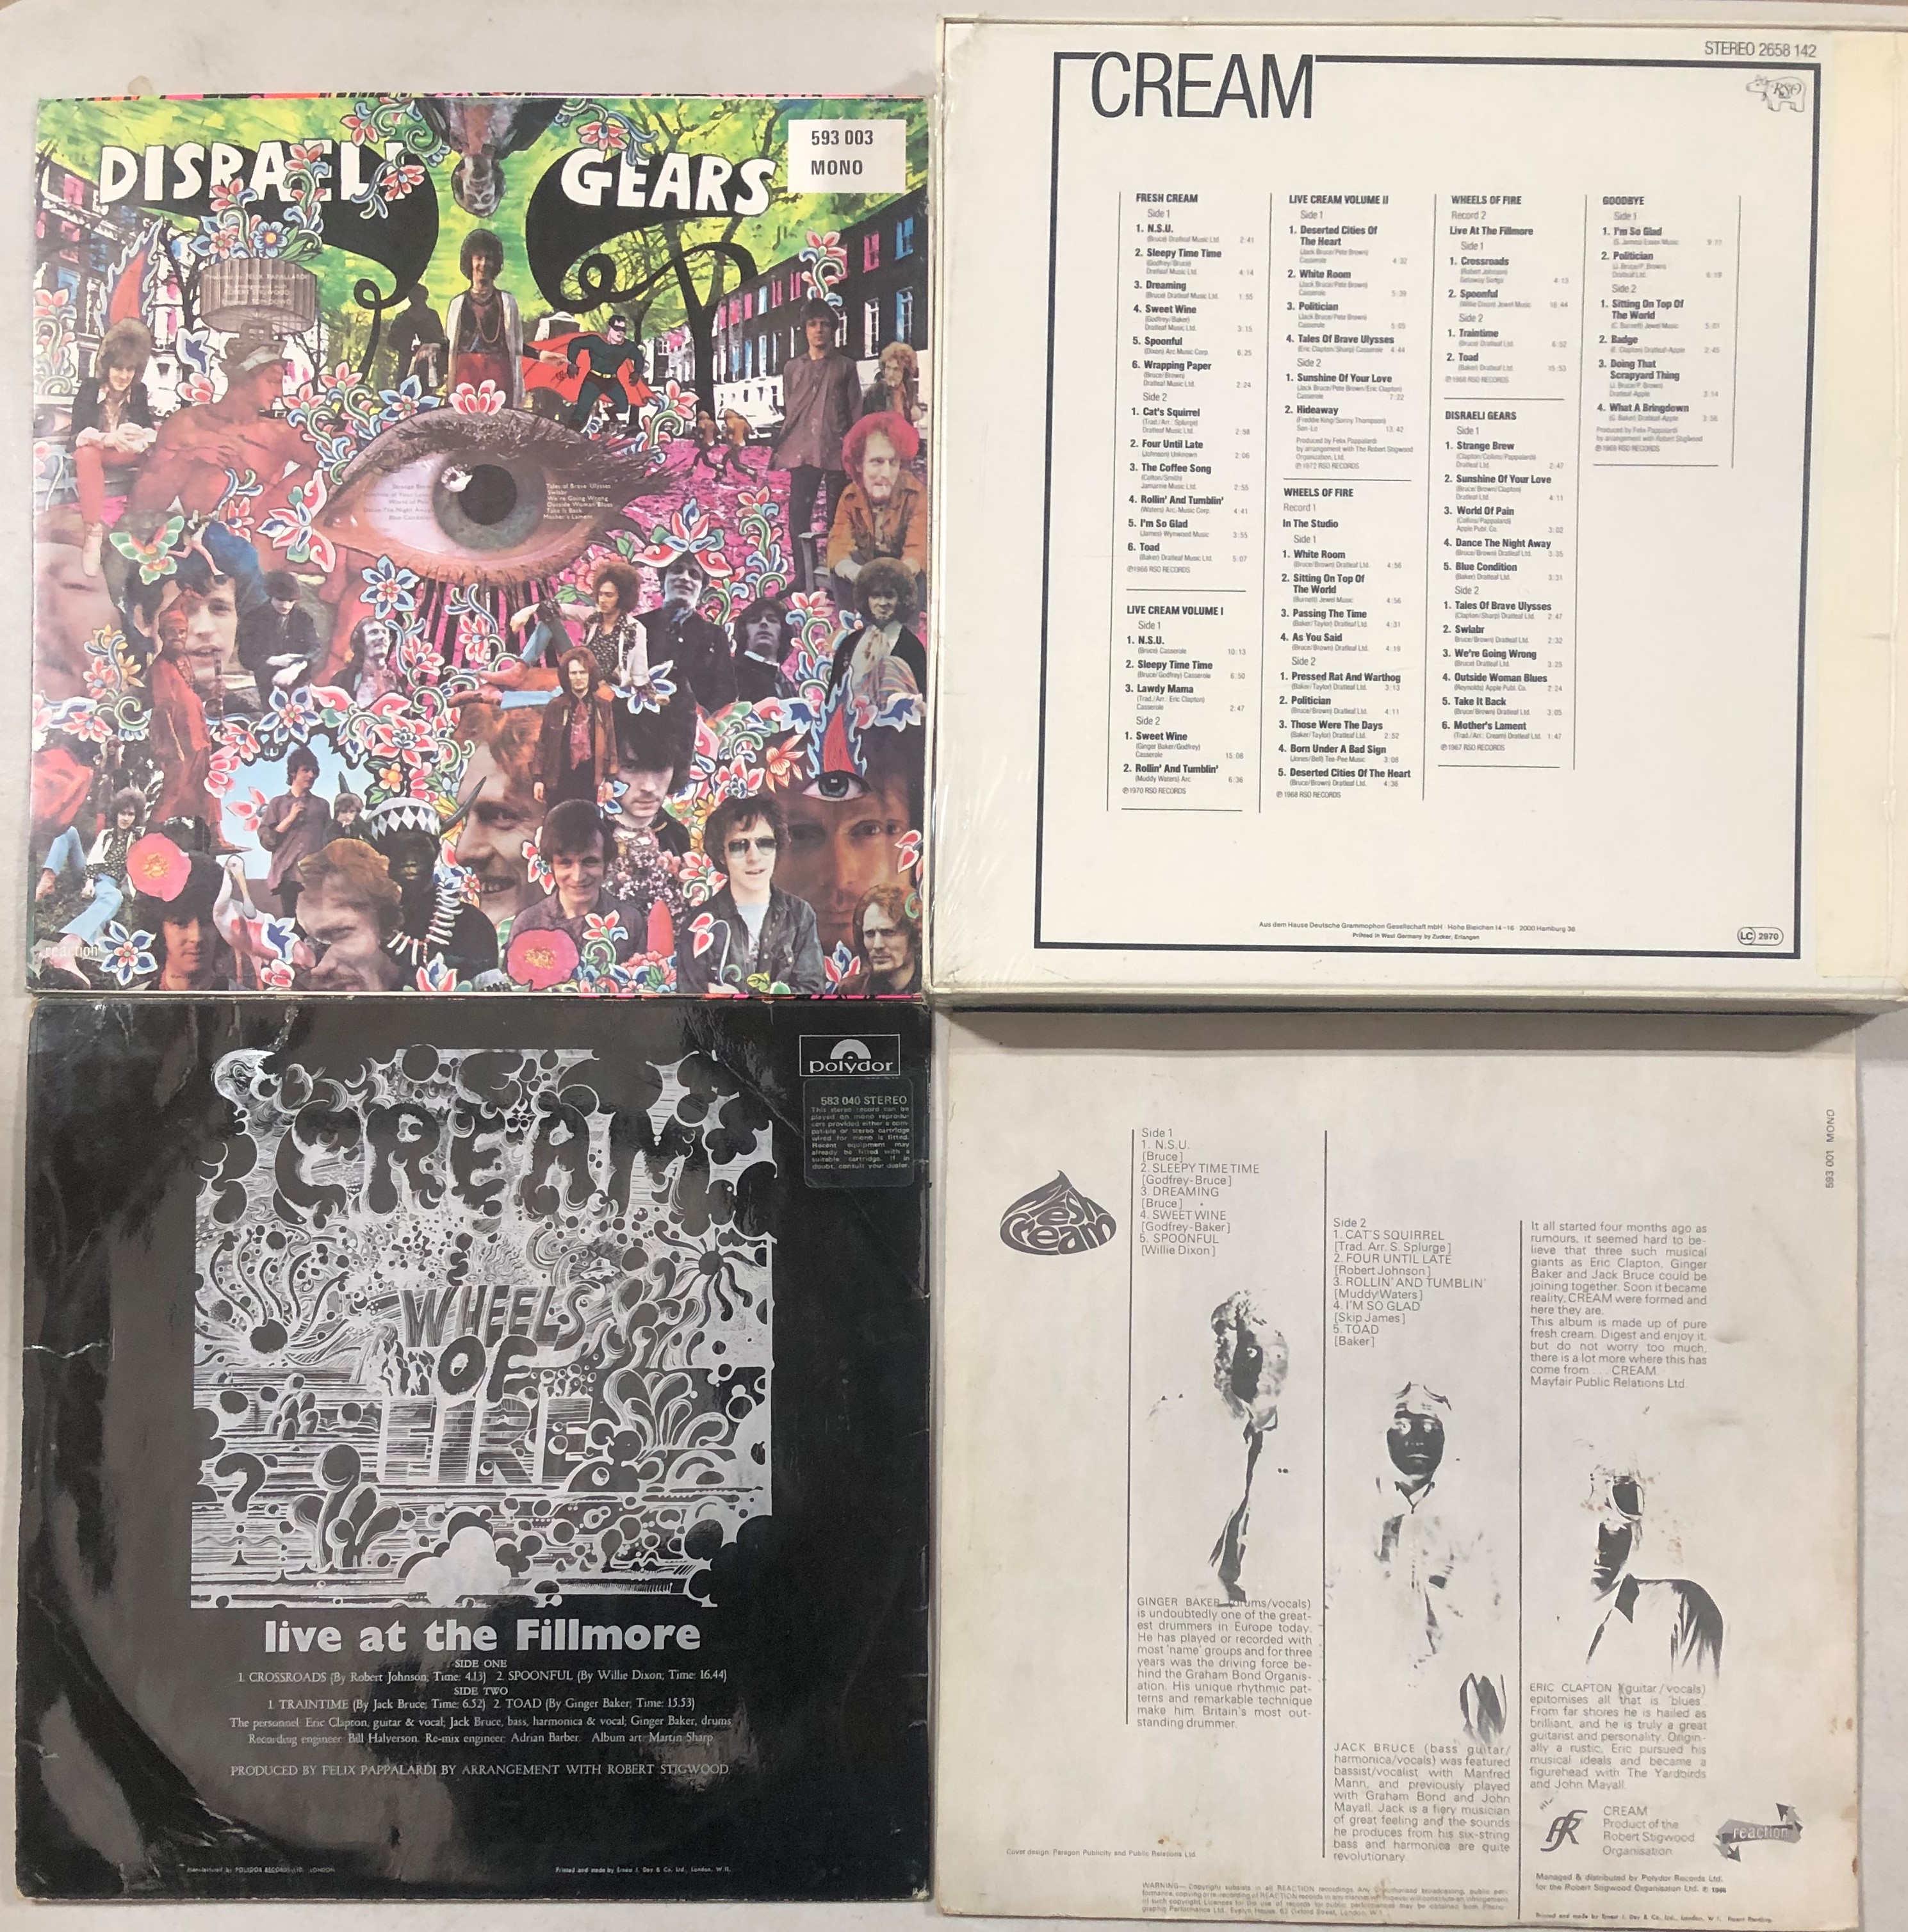 CREAM - LPs WITH BOX SET. Fresh bundle of 3 x original title LPs with 1 x limited edition box set. - Image 2 of 2